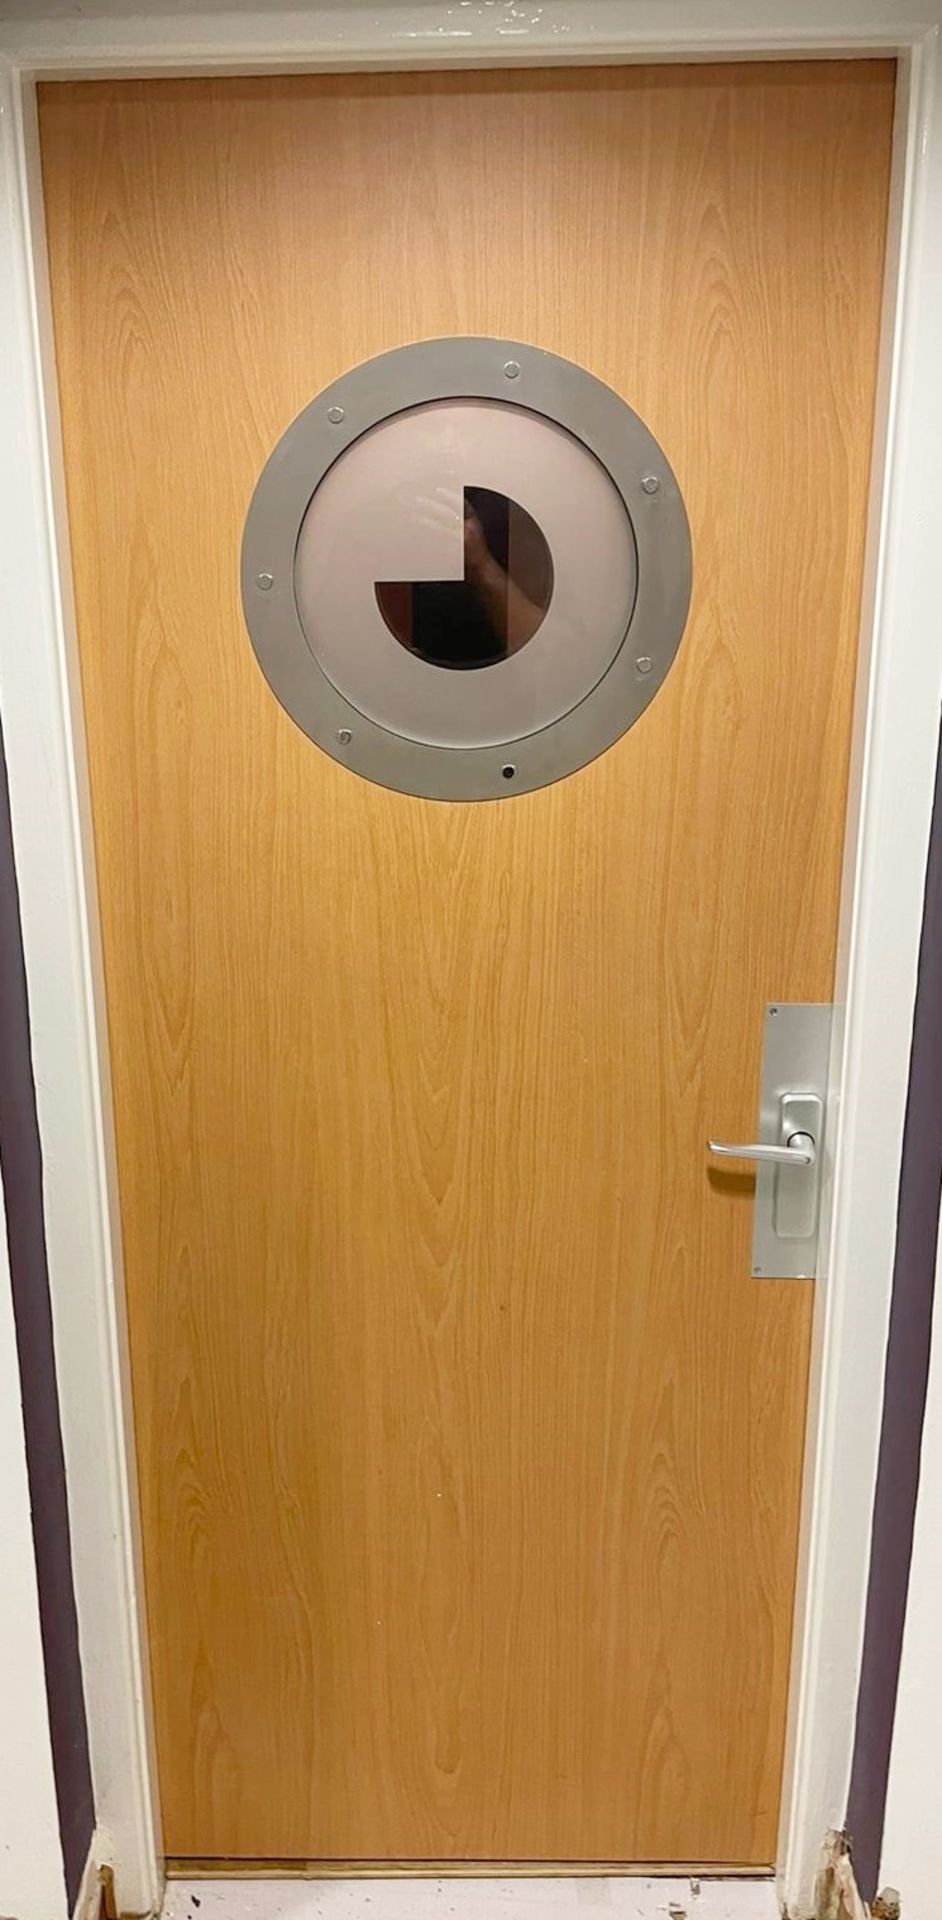 1 x Office Wooden Door With Circular Glass Window 190(H) x 76(W)  - To Be Removed From An - Image 2 of 2